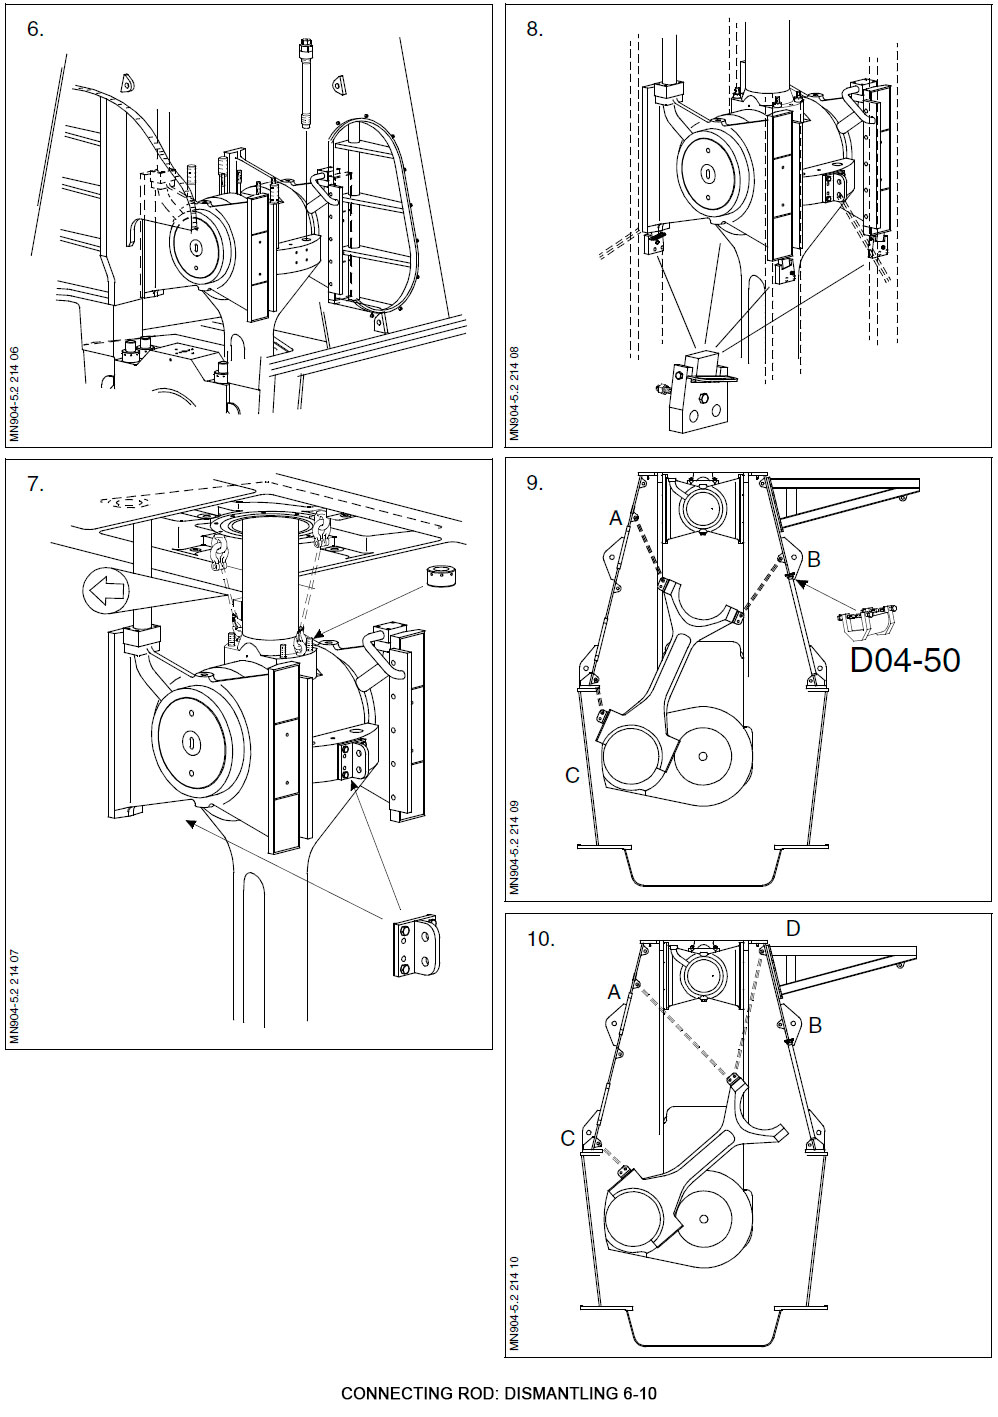 Connecting Rod: Dismantling